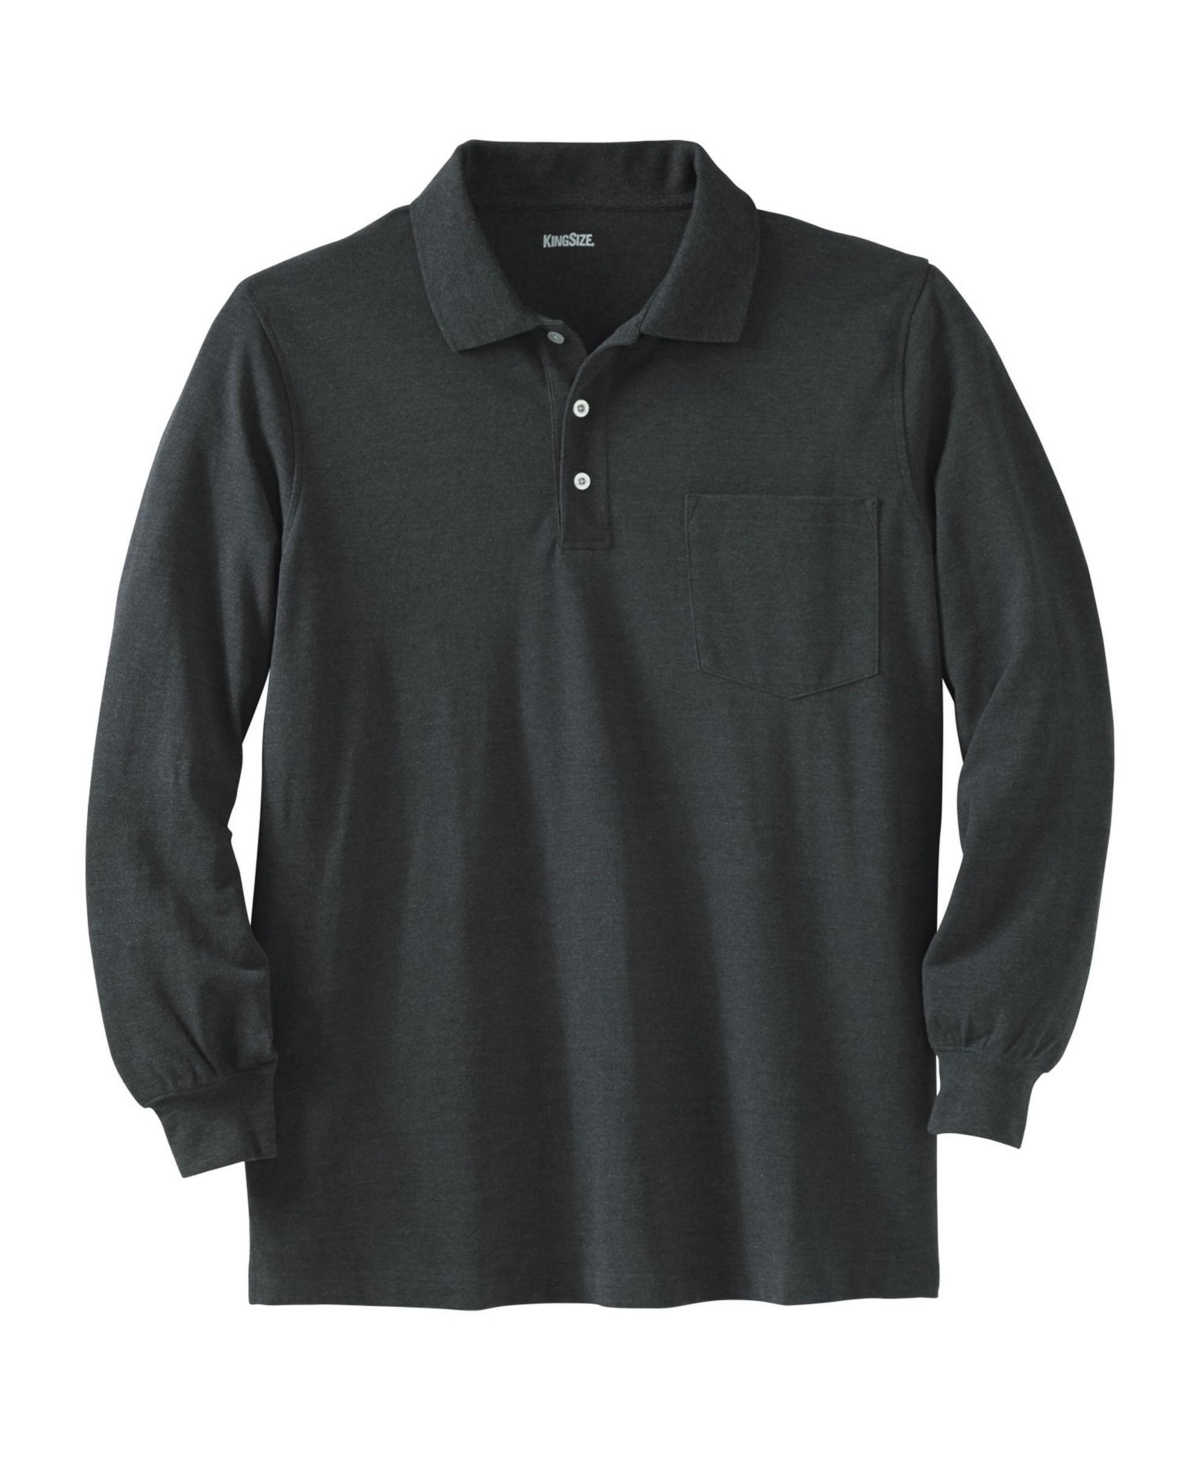 Big & Tall Long-Sleeve Shrink-Less Pique Polo - Heather charcoal